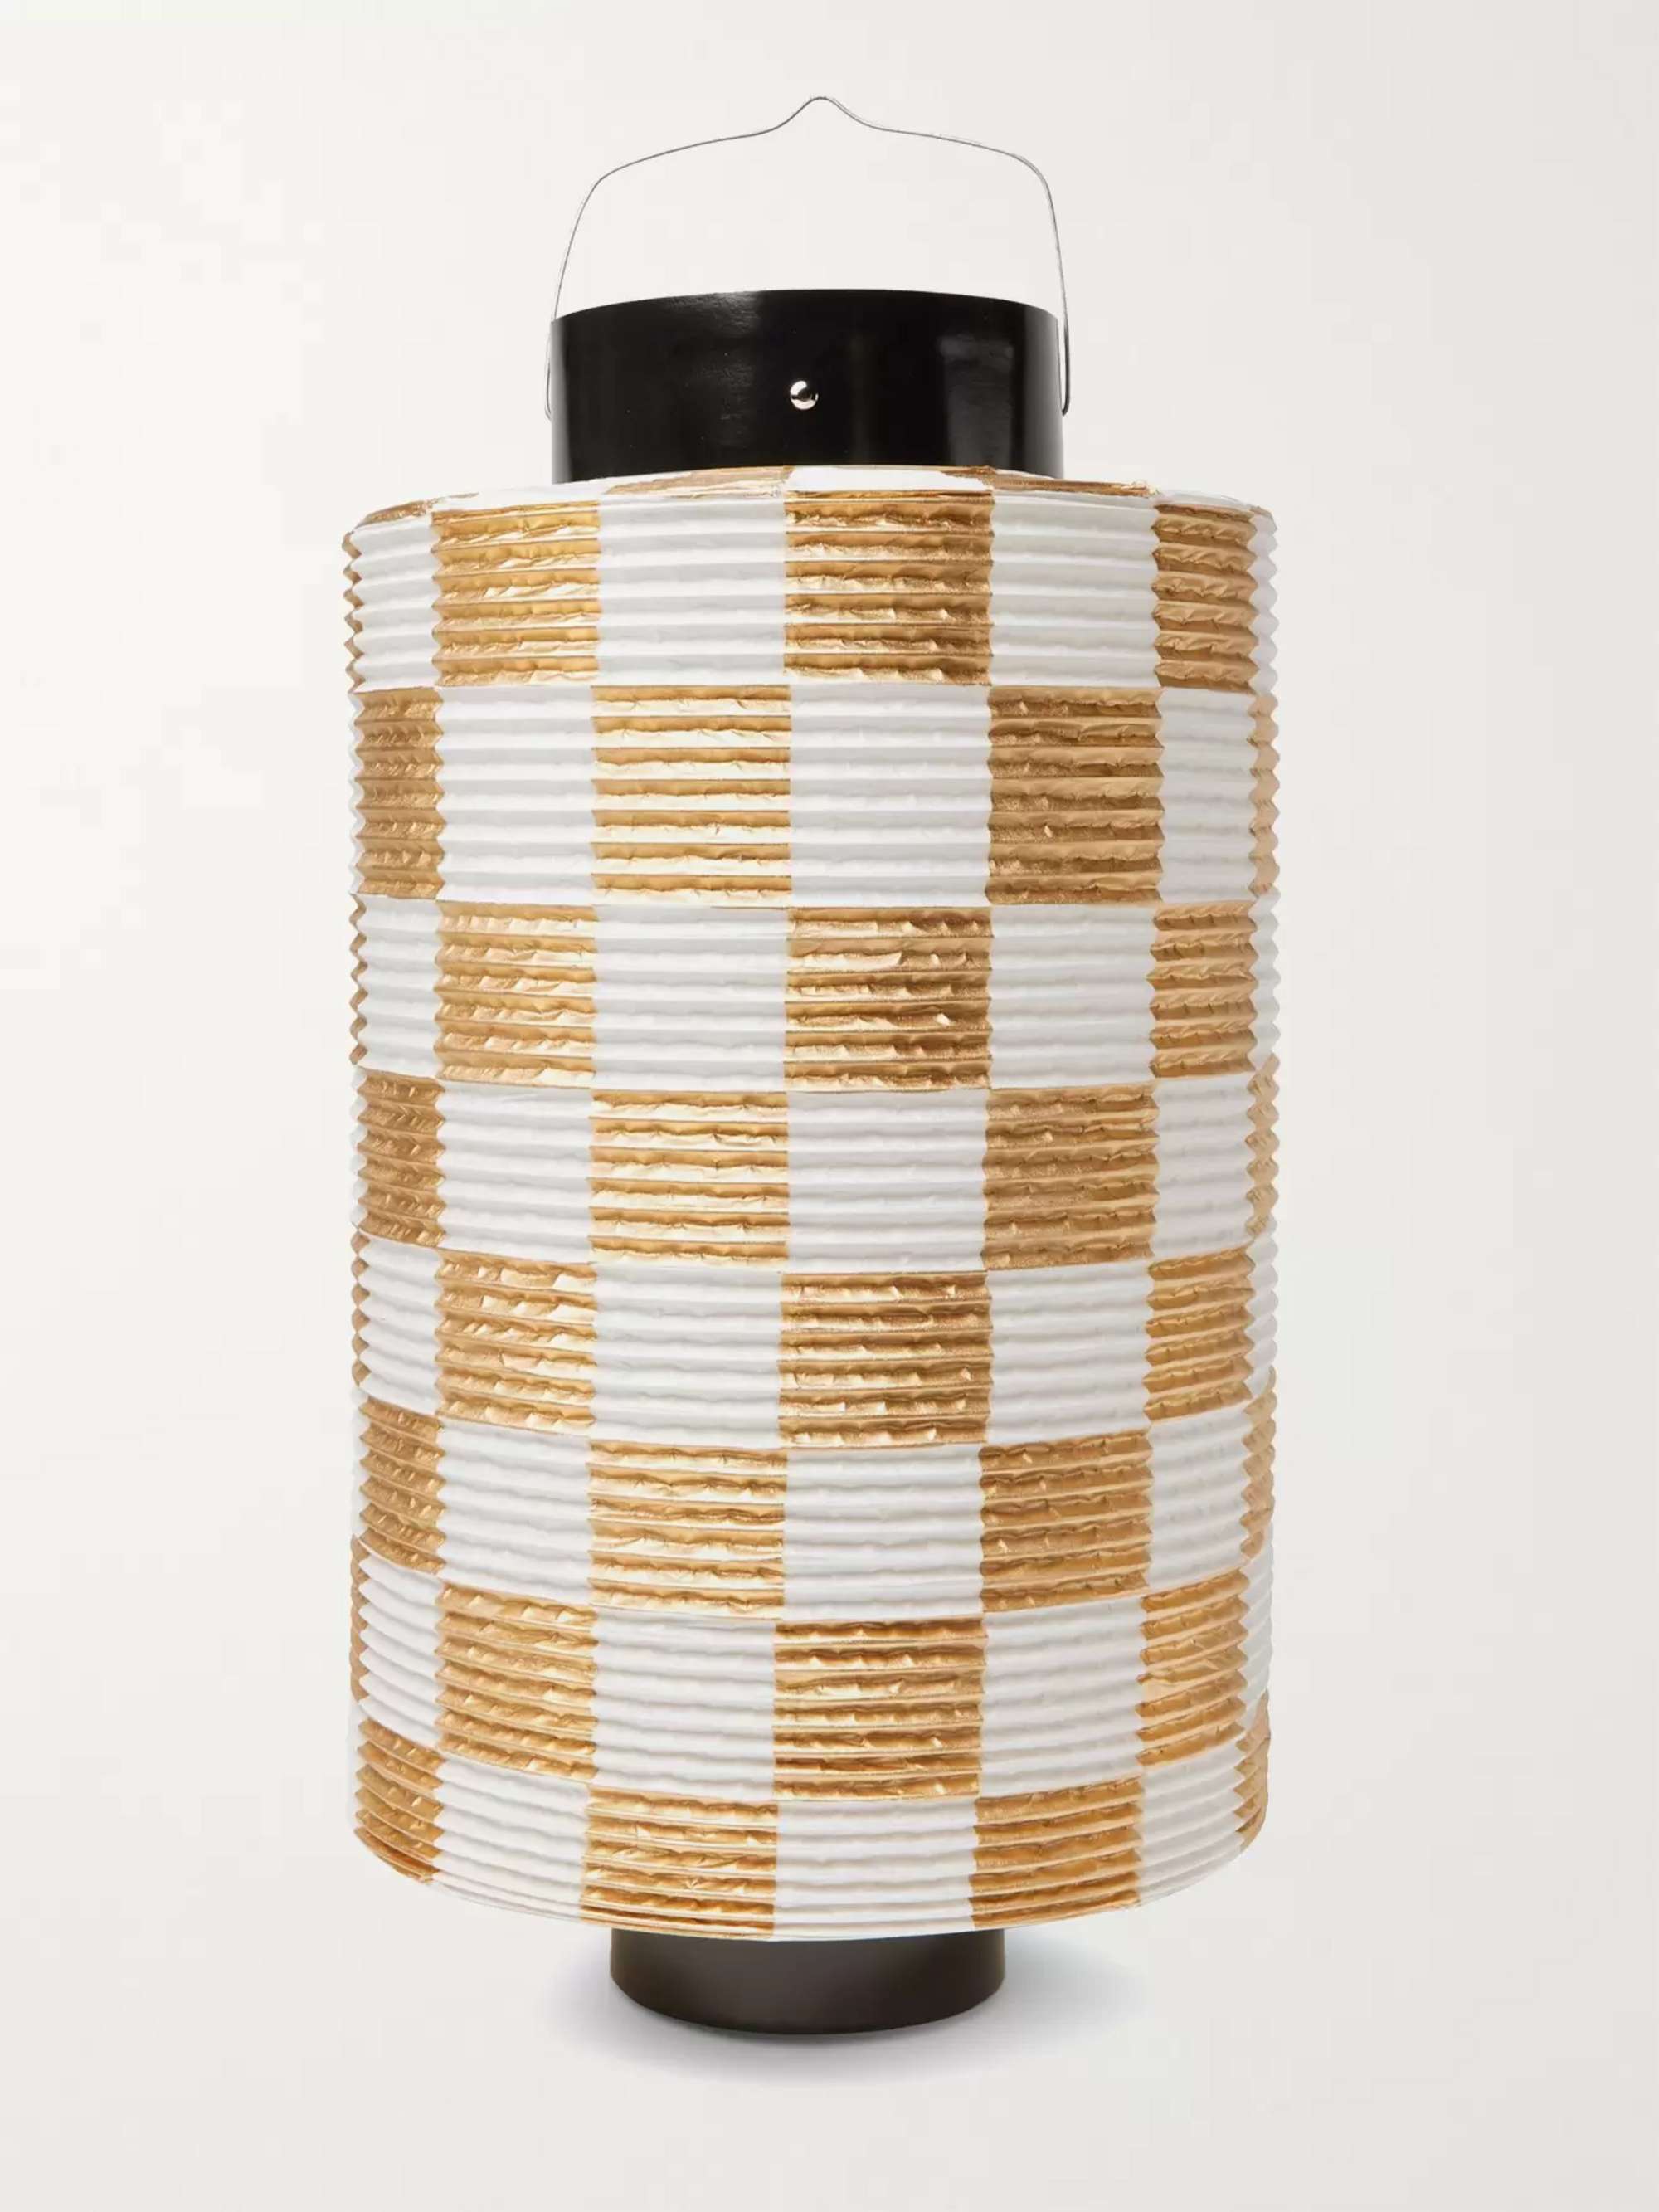 BY JAPAN + Beams Japan Checked Paper Lantern for Men